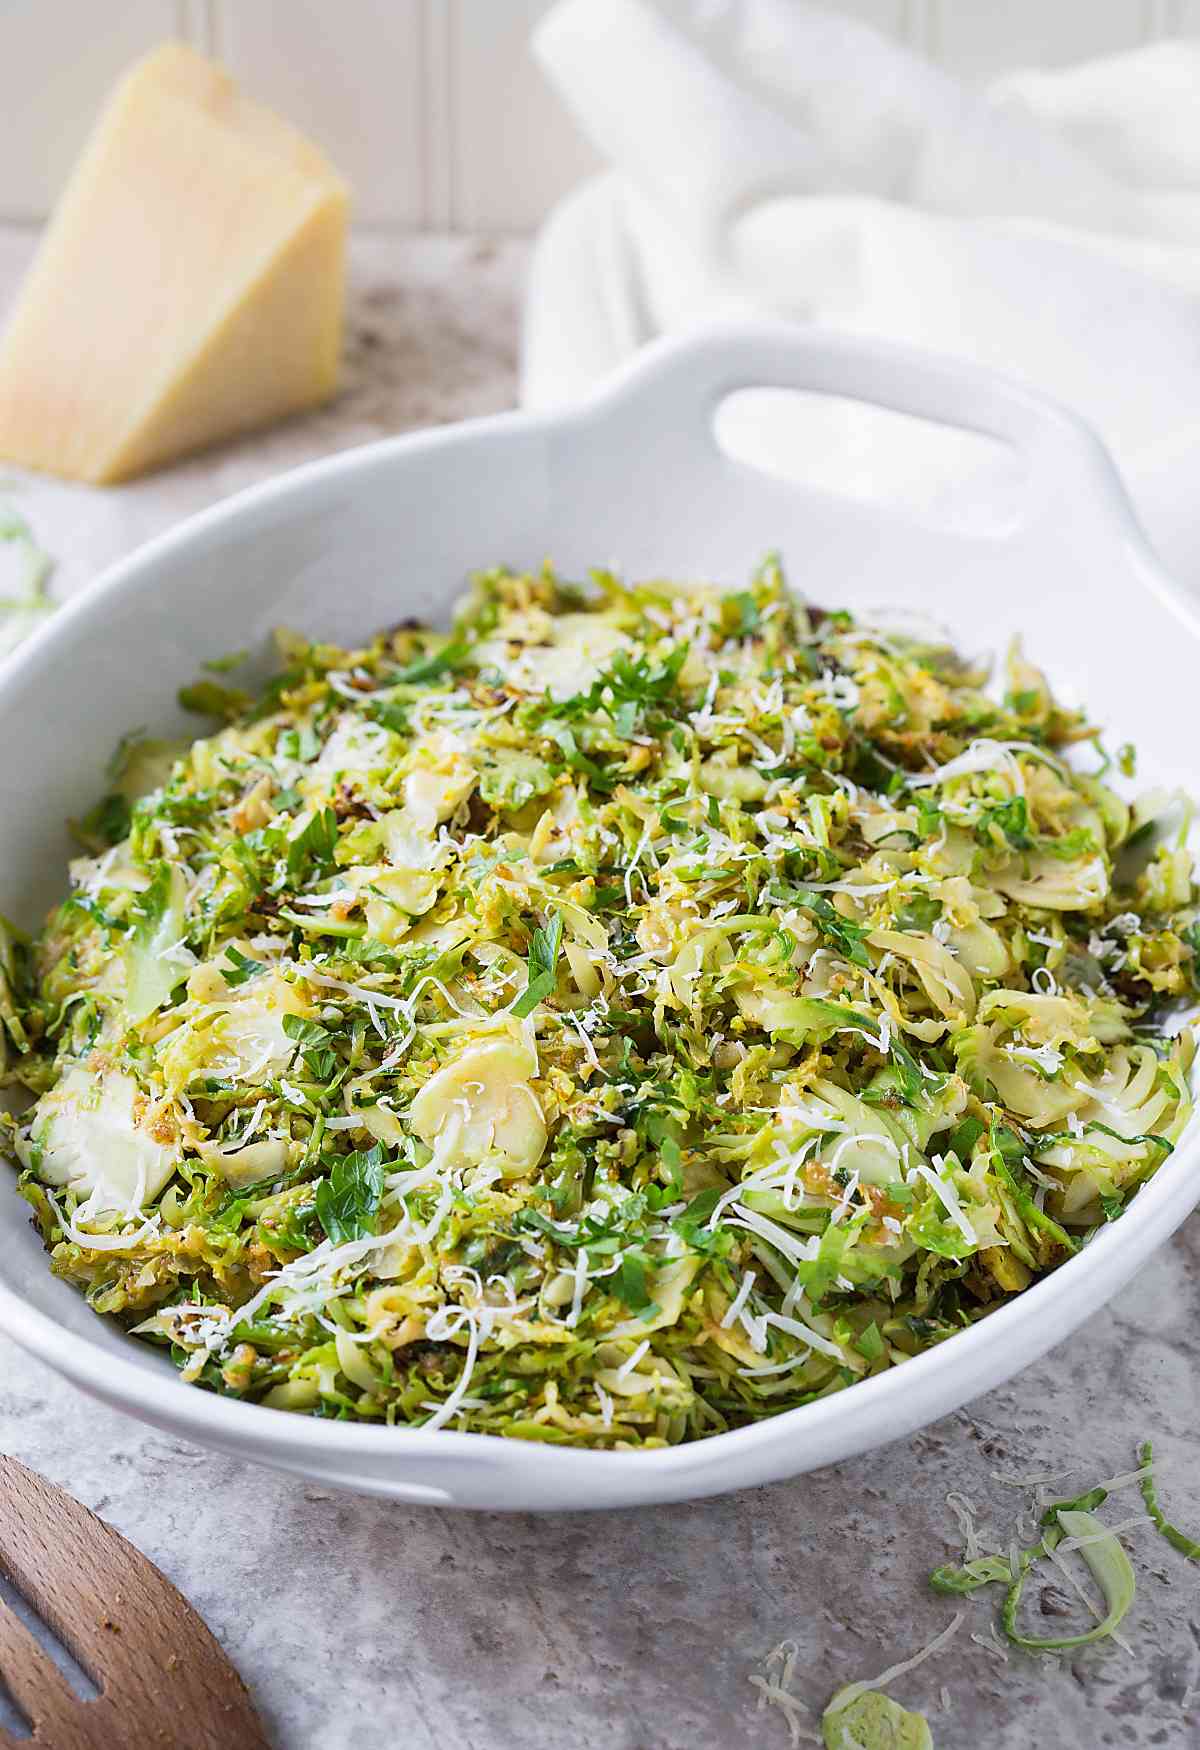 Image showing side view of shredded and sauteed garlic parmesan brussels sprouts in a serving bowl.